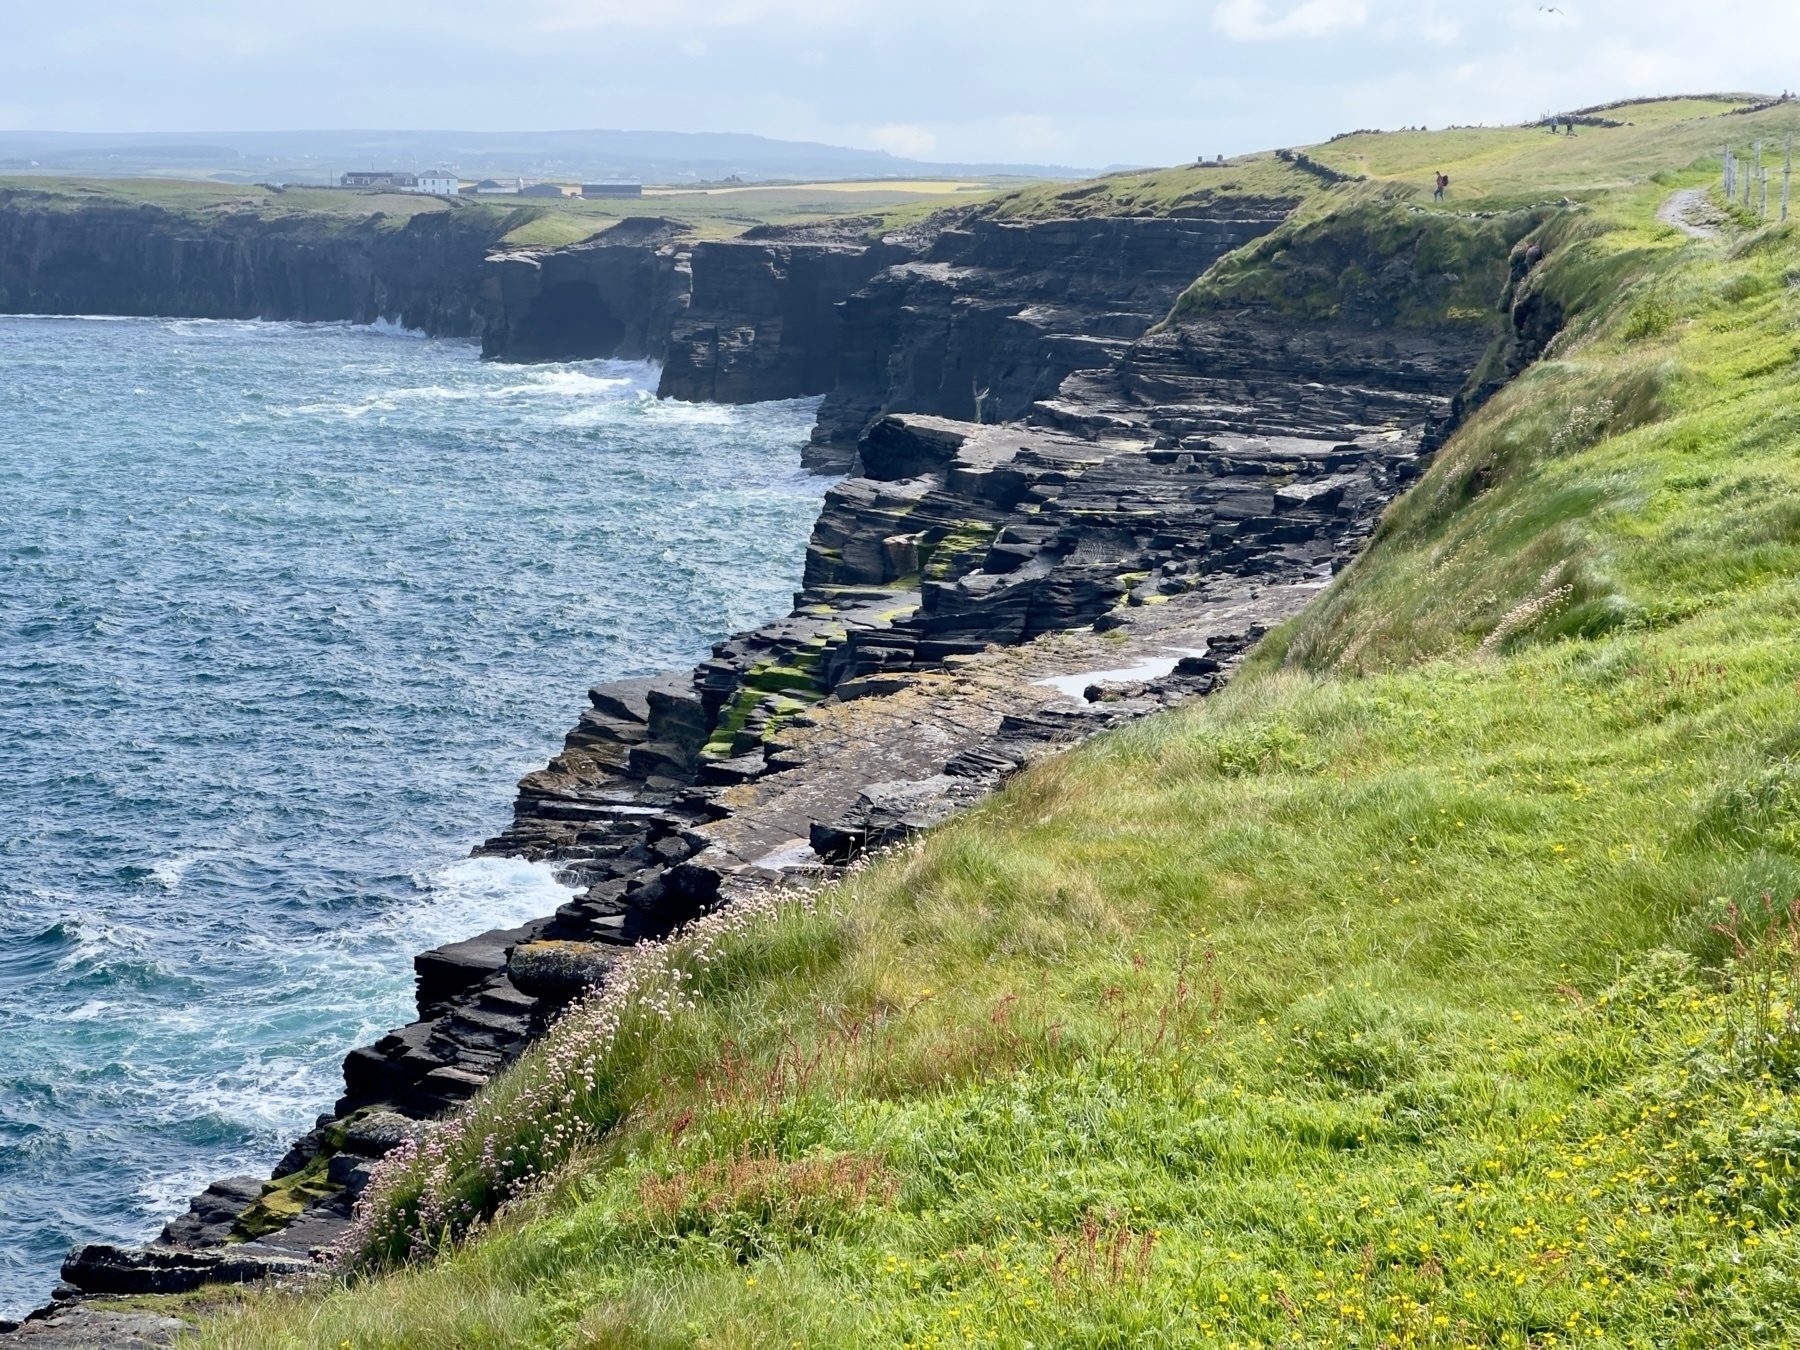 Auto-generated description: A rugged coastline with dramatic cliffs and a grassy landscape overlooks a vast, turbulent sea.